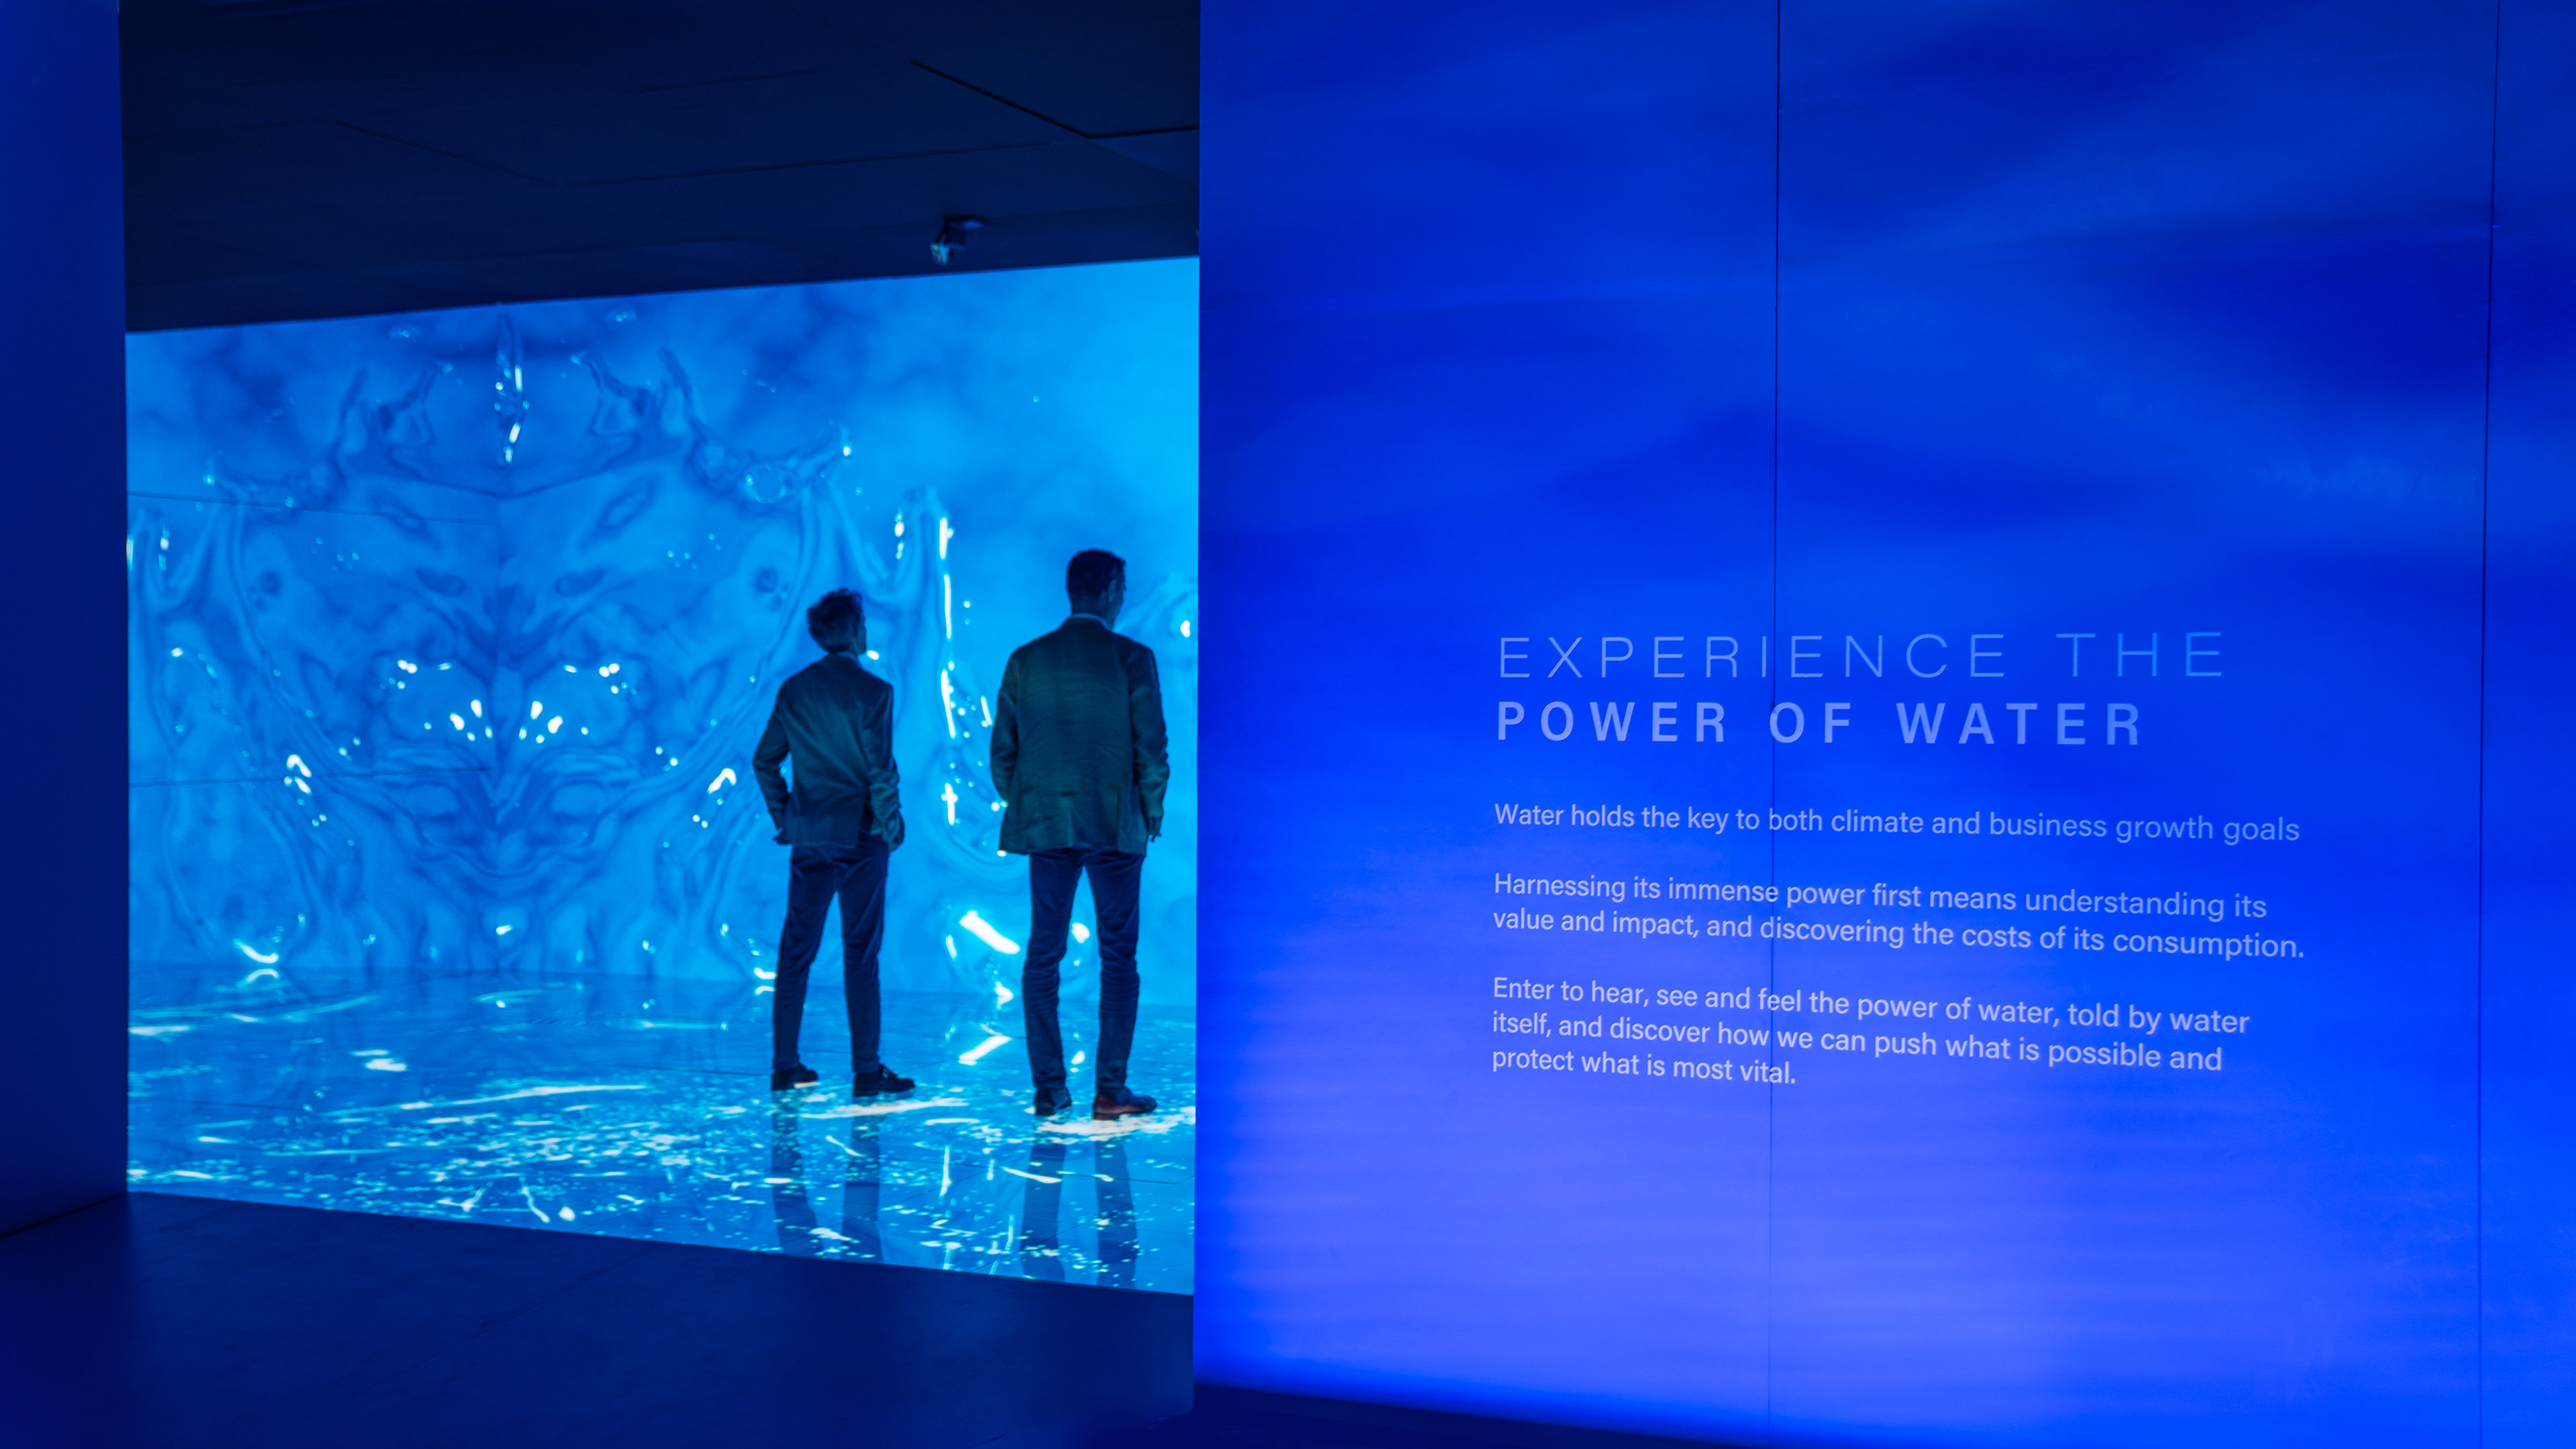 Two people standing inside a room with led walls and floors. Water graphics fill the room. Outside the room is a text description of the installation 'Experience the Power of Water'